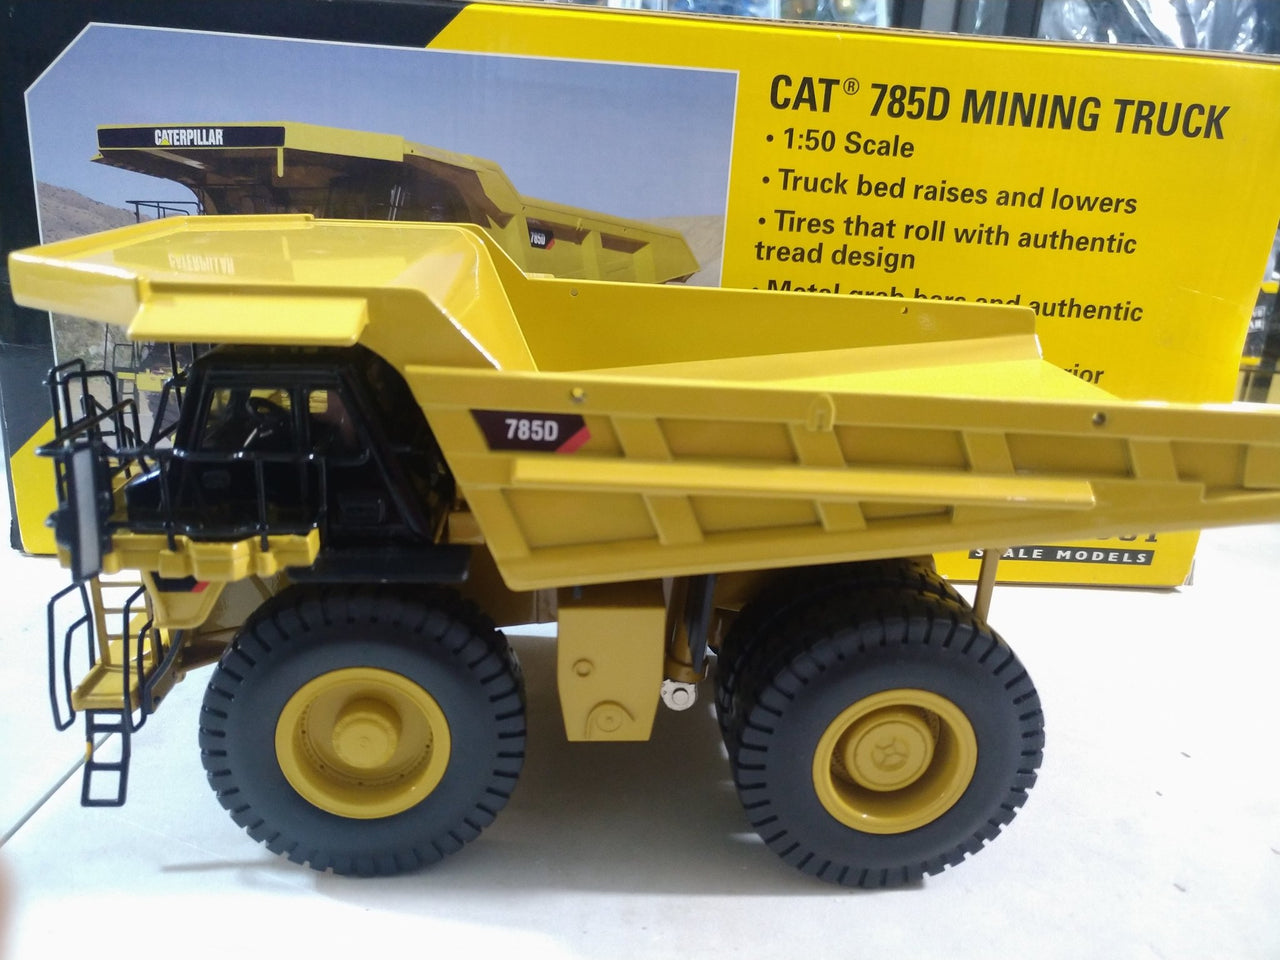 55216 Cat 785D Mining Truck 1:50 Scale (Discontinued Model)